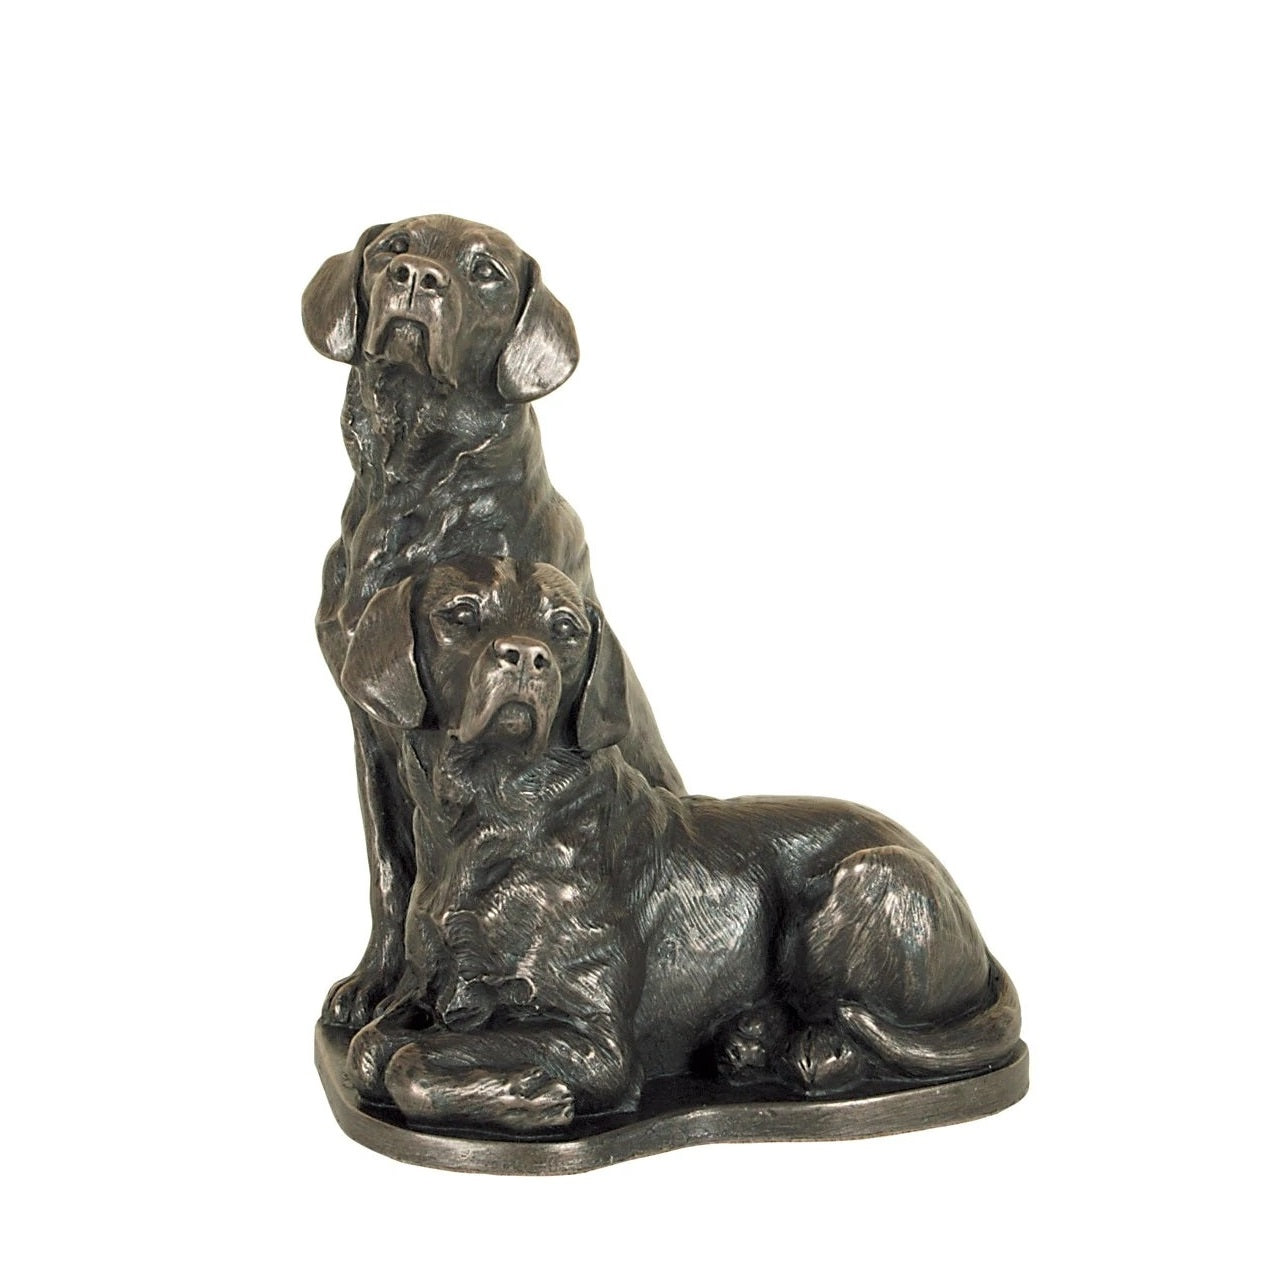 Genesis Pair of Labradors  Pair of Labradors for the dog lover.  Genesis Fine Arts has evolved into a much loved and world famous Irish brand to produce a striking range of handcrafted cold cast bronze sculptures.